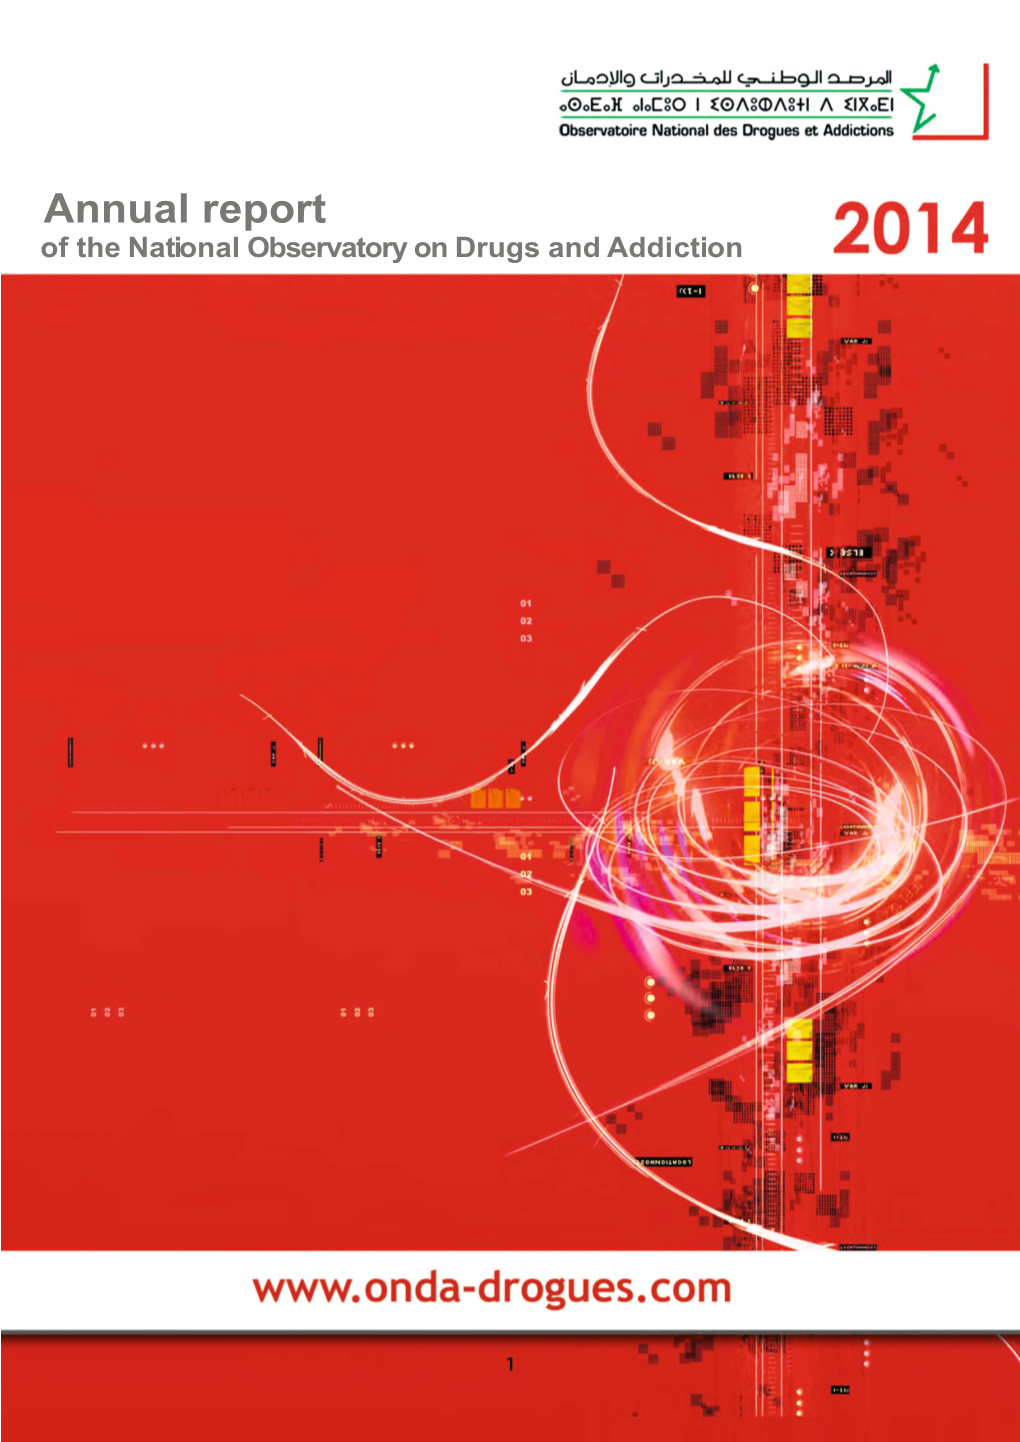 Annual Report of the National Observatory on Drugs and Addiction